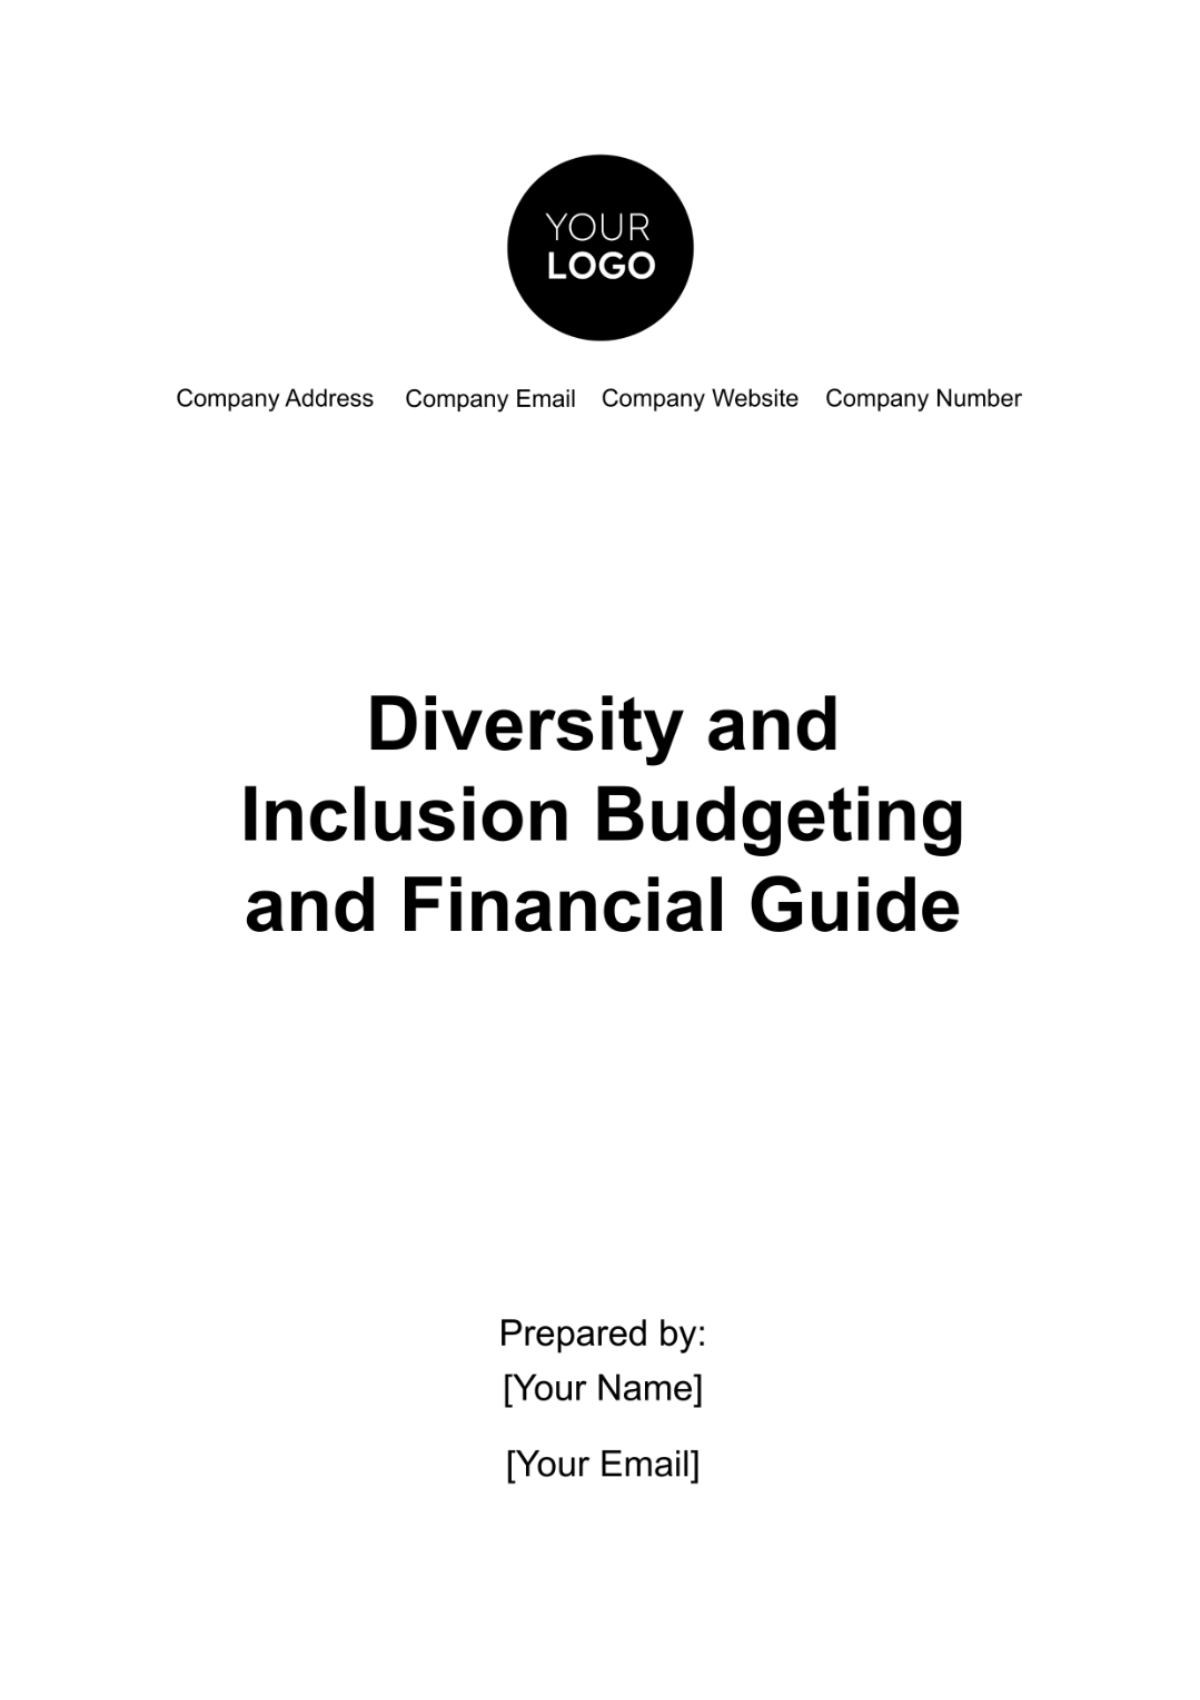 Diversity and Inclusion Budgeting and Financial Planning Guide HR Template